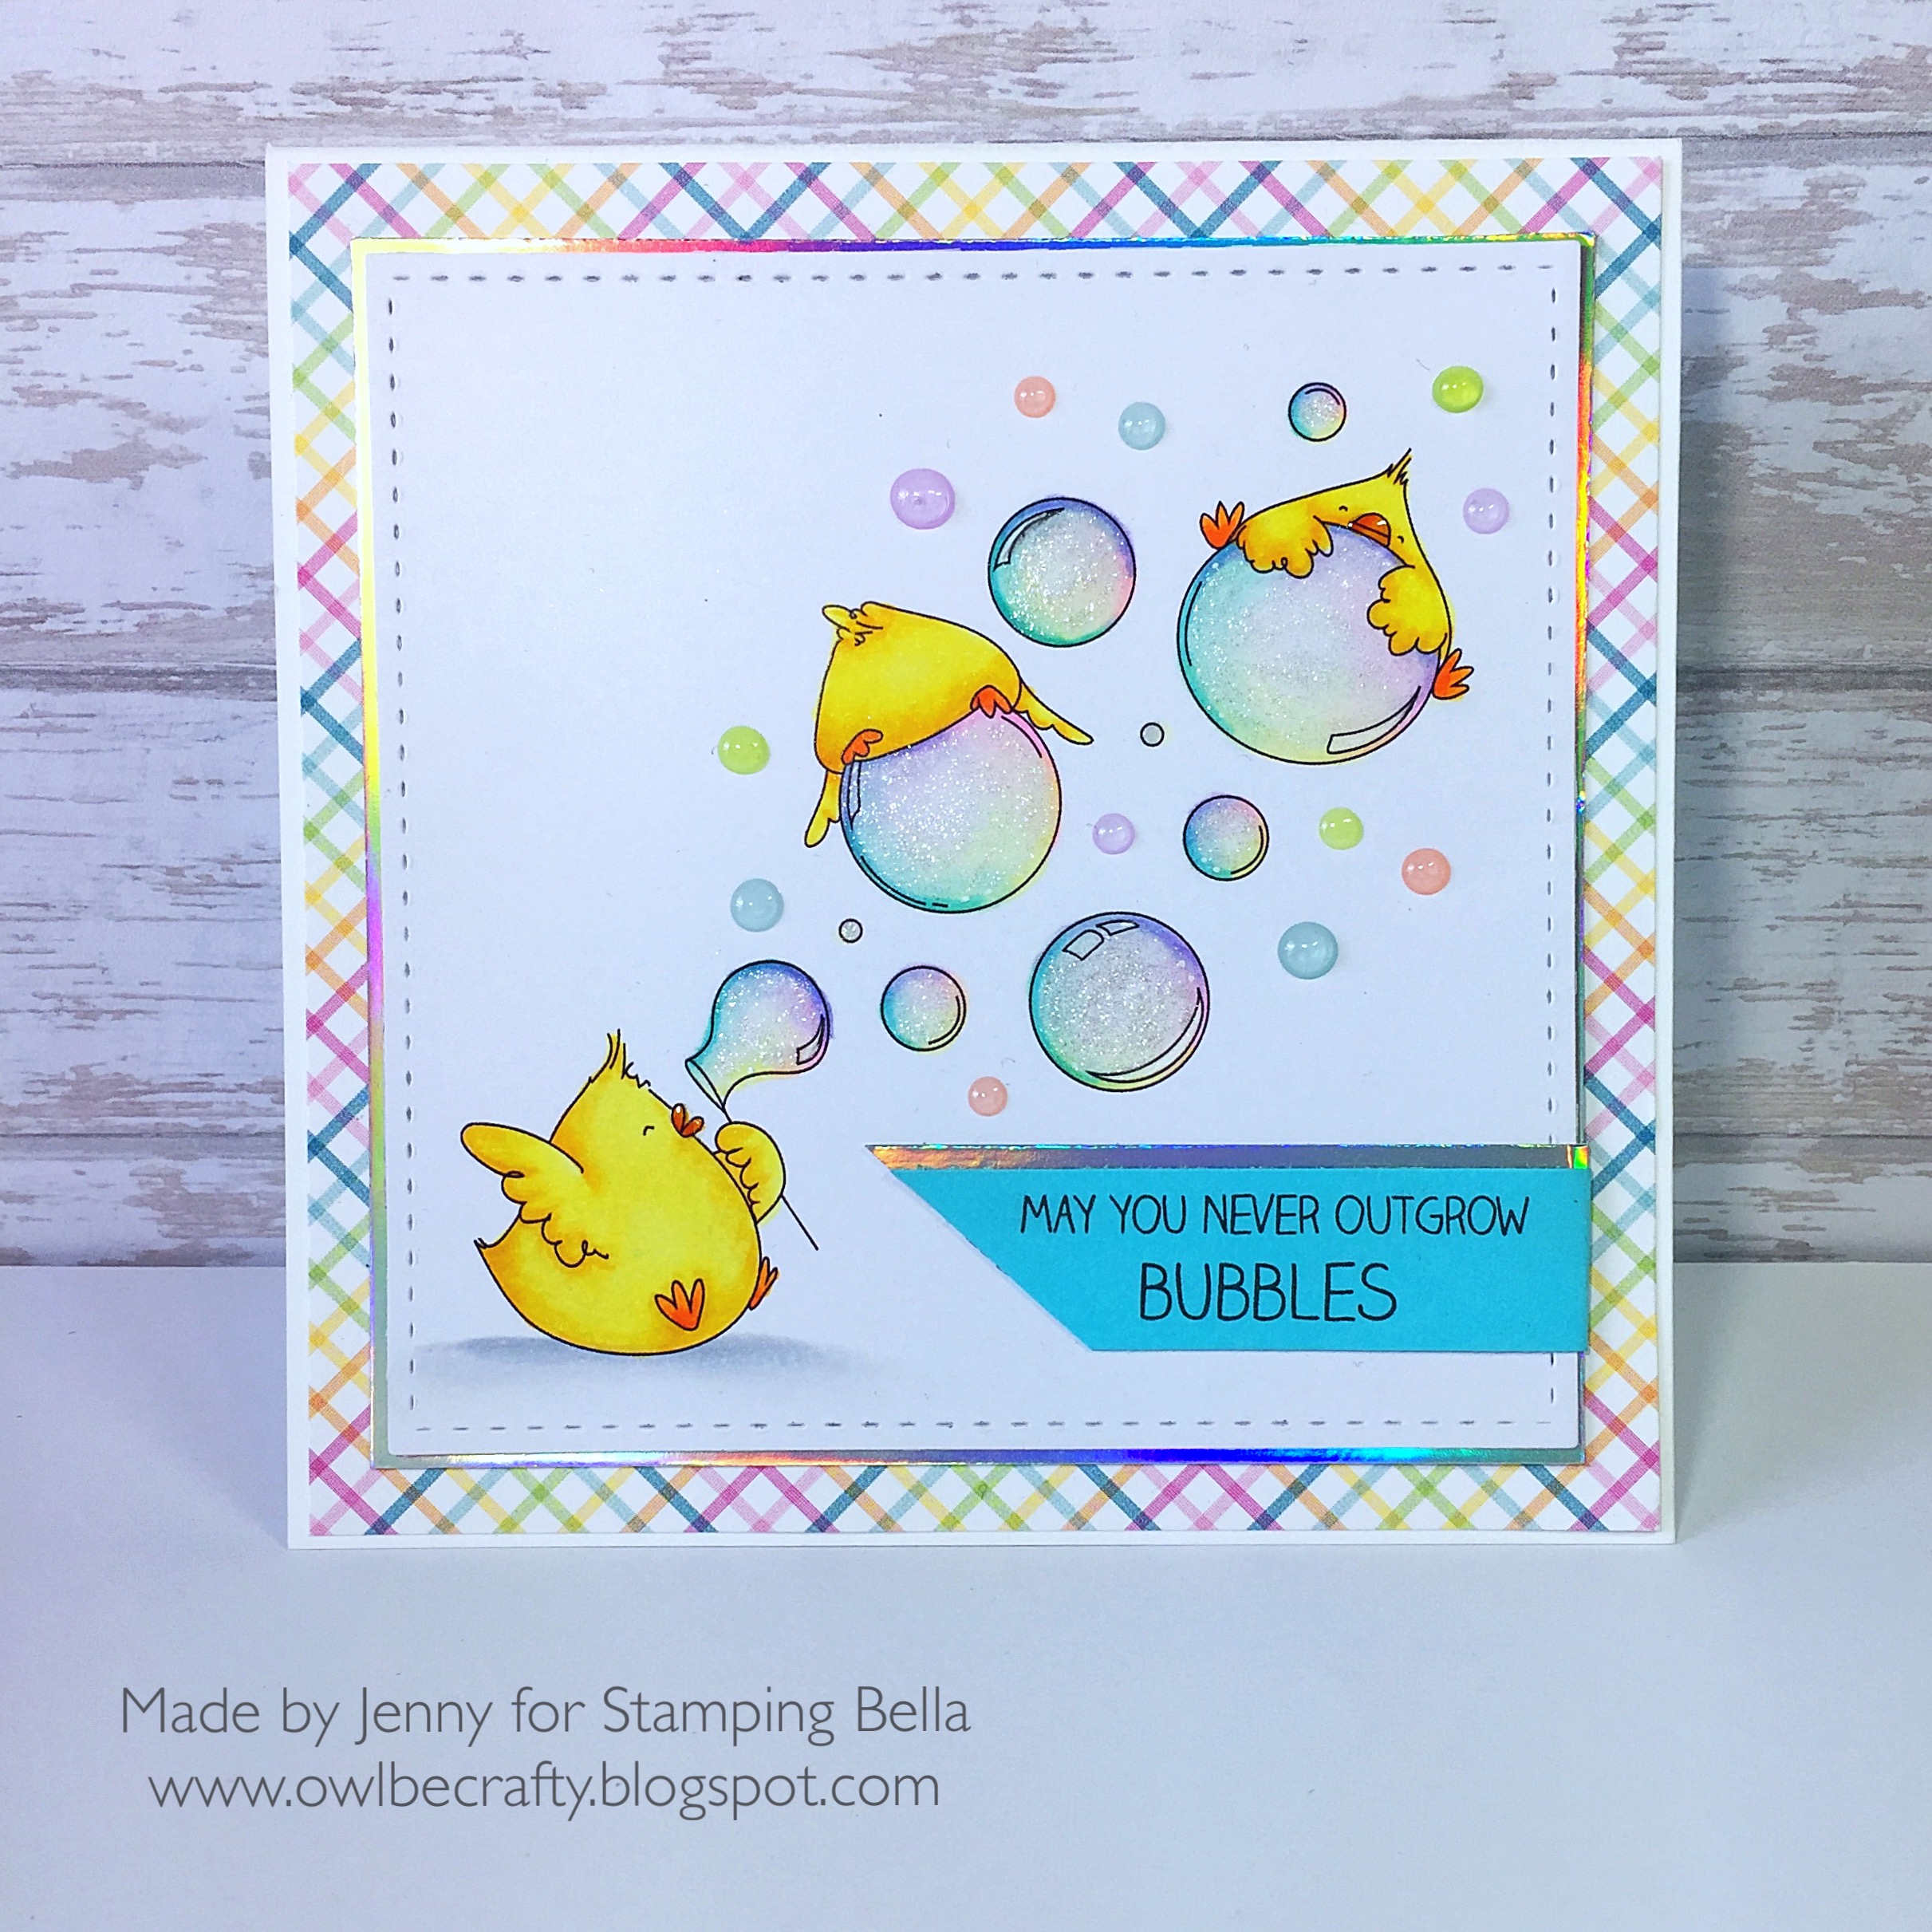 Stamping Bella SUMMER 2017 RELEASE: BUBBLE CHICKS rubber stamps. Card by Jenny Bordeaux